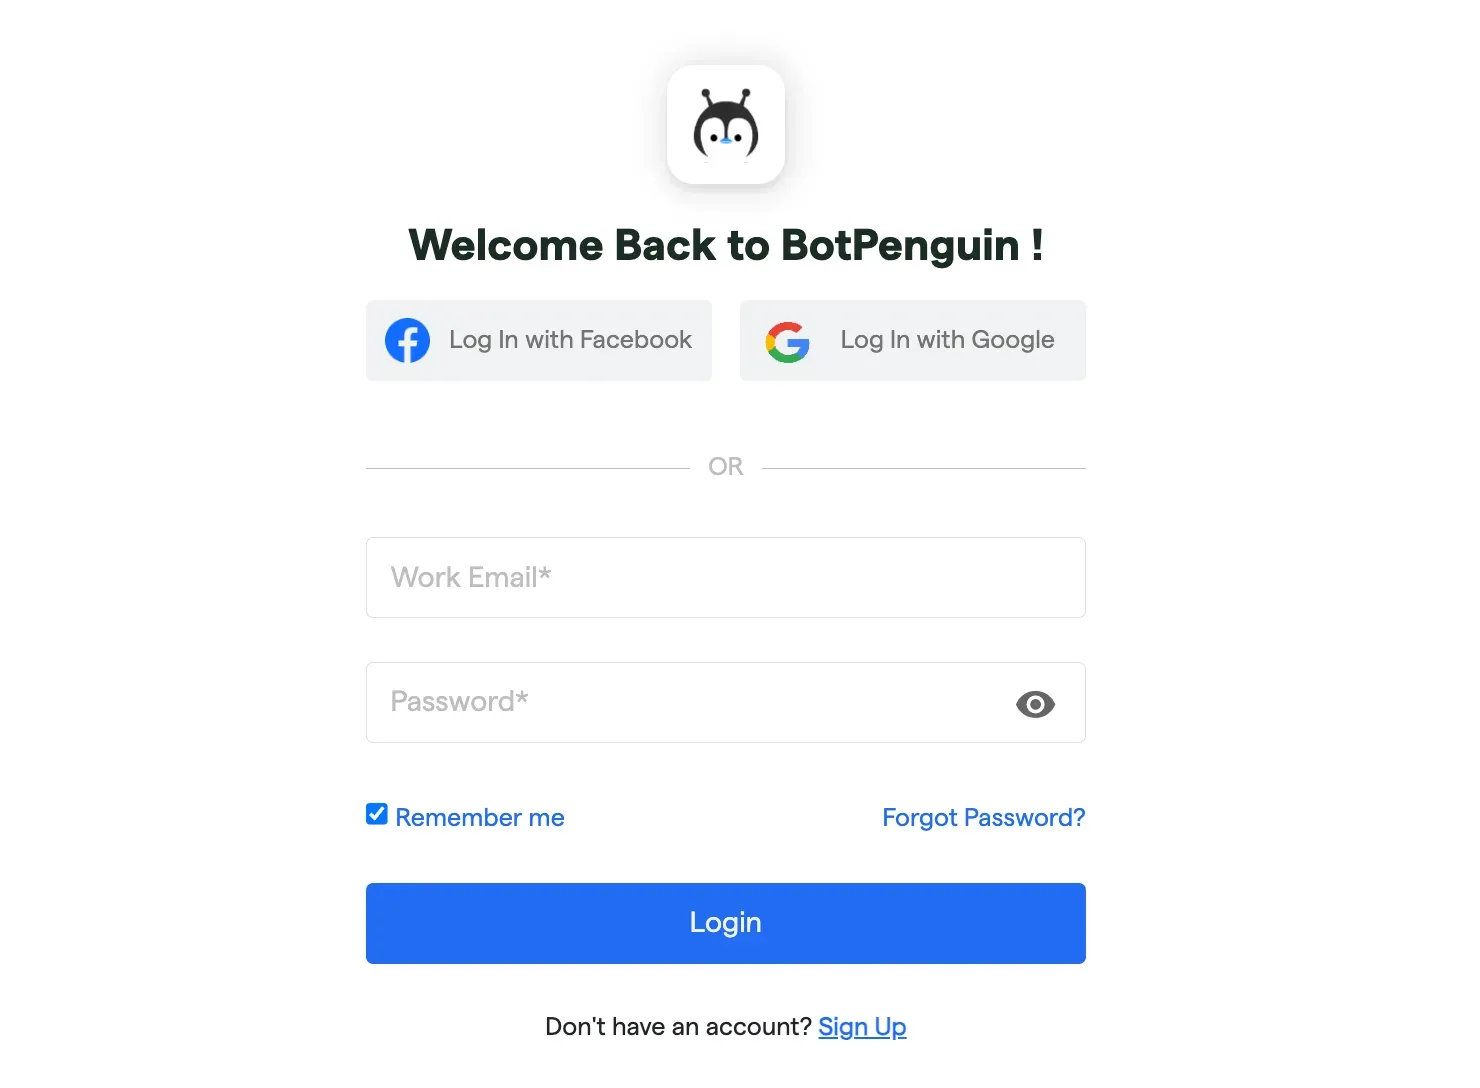 Step-by-step guide on how to integrate BotPenguin with GitHub